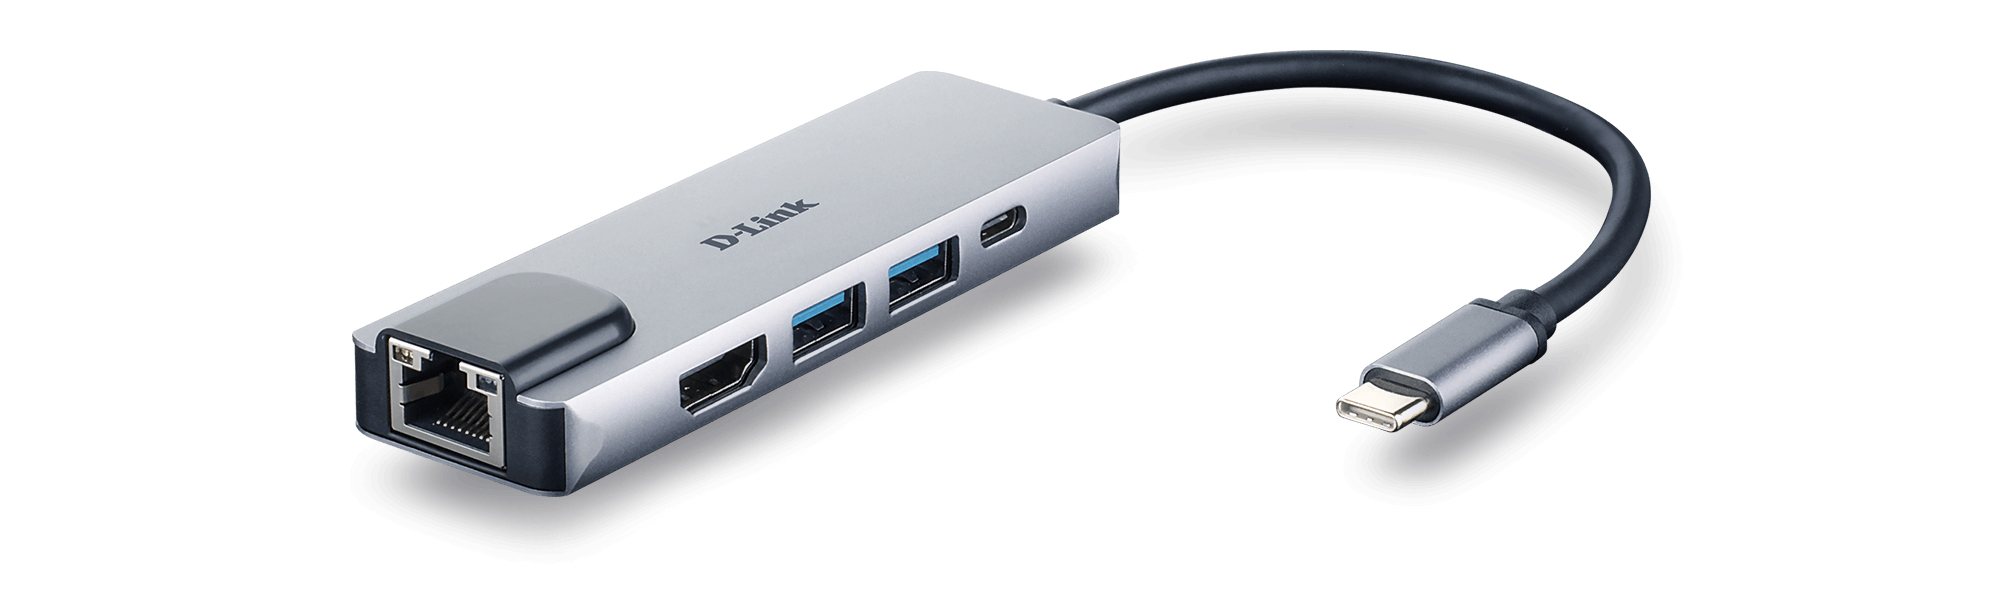 DUB-M520 5-in-1 USB-C Hub with HDMI/Ethernet and Power Delivery - front